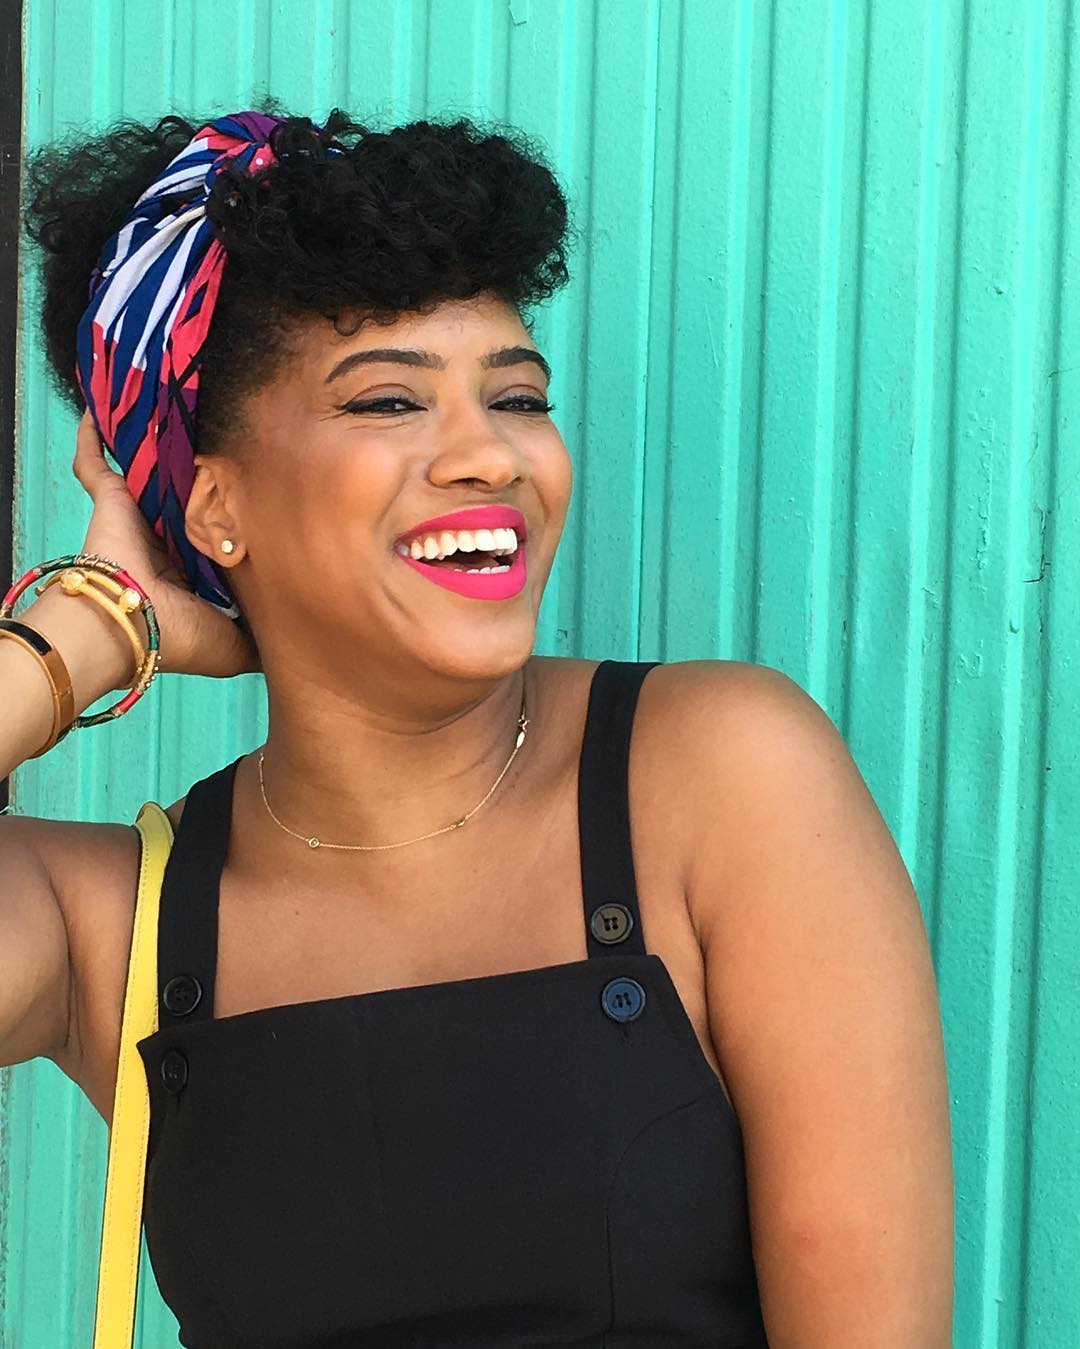 Meet The Founders Behind 75 Black-Owned Skin Care And Cosmetics Brands You Should Be Shopping